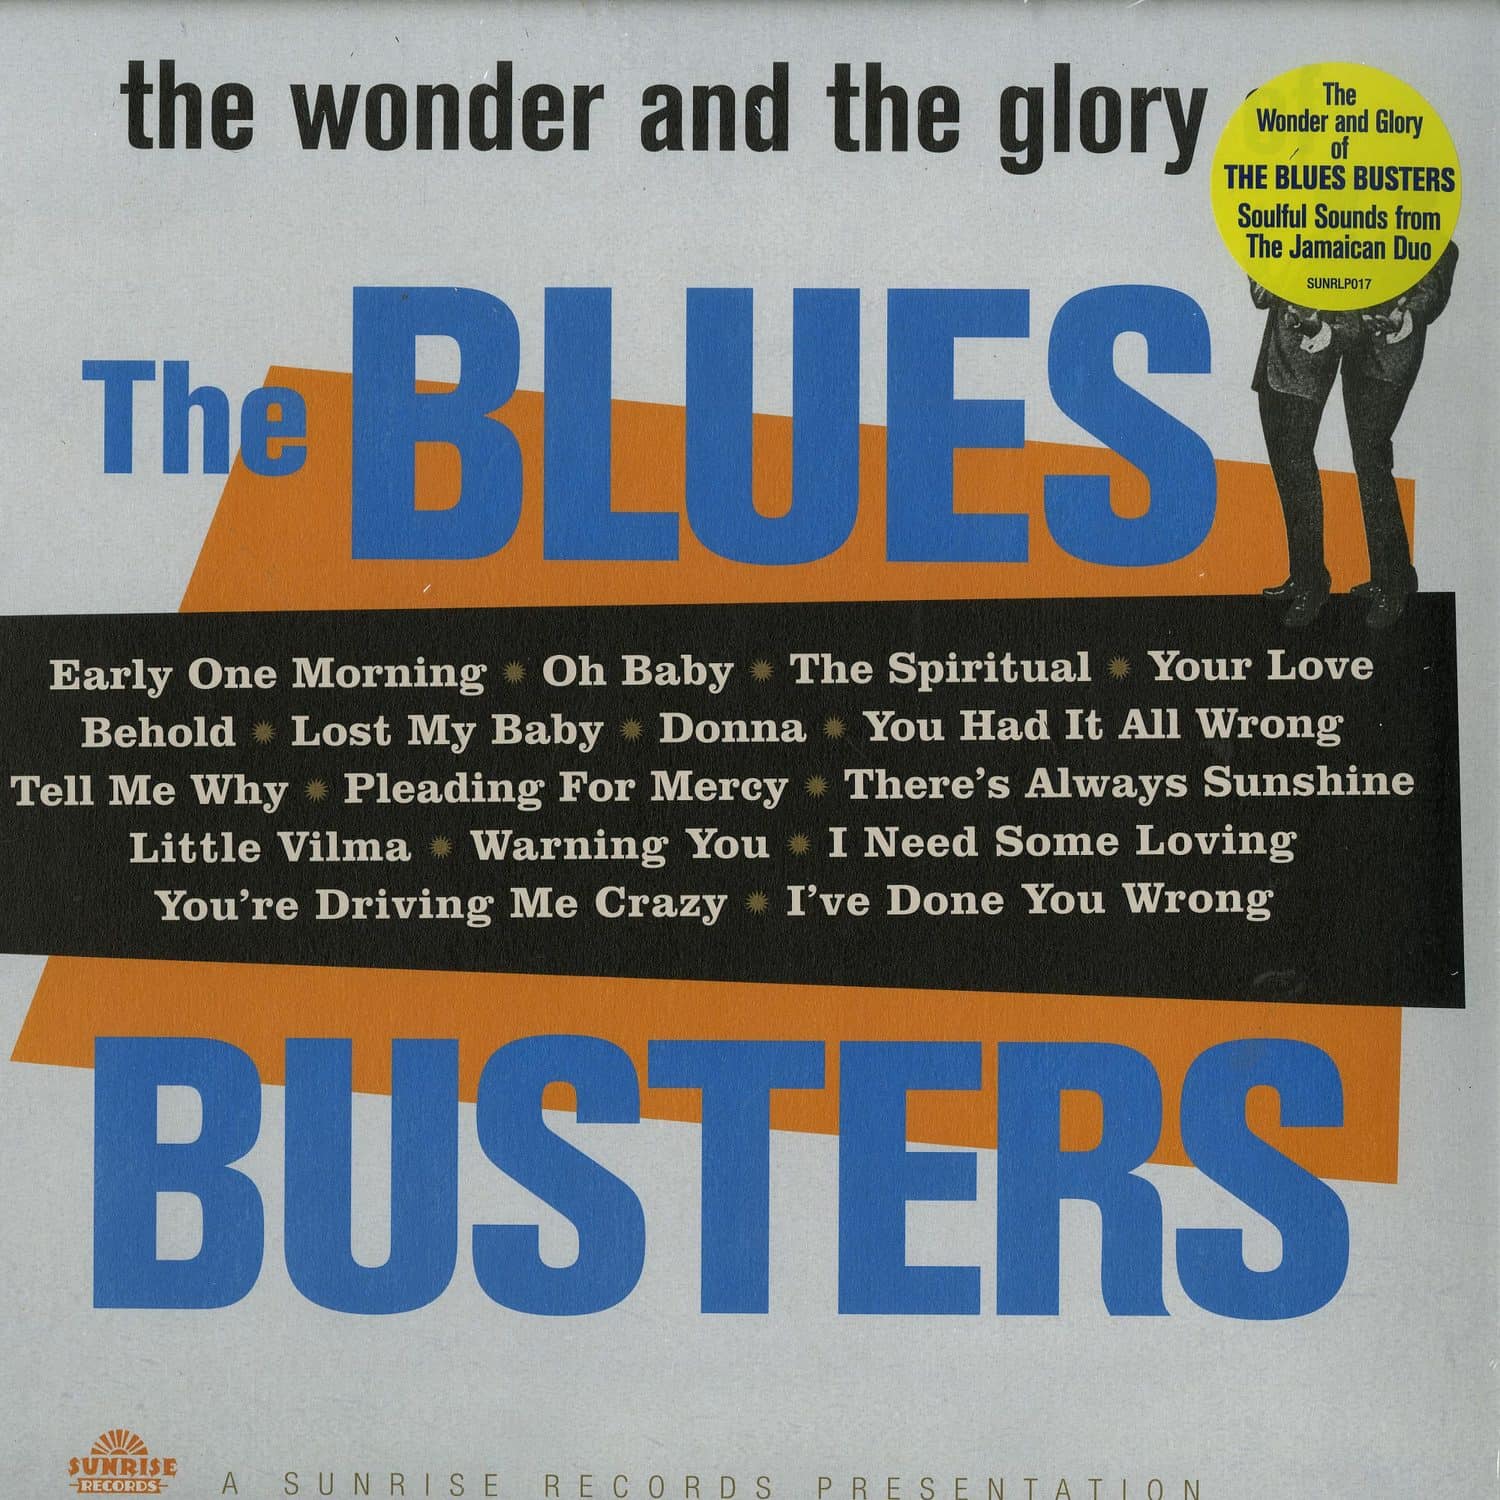 The Blues Busters - THE WONDER AND GLORY OF 